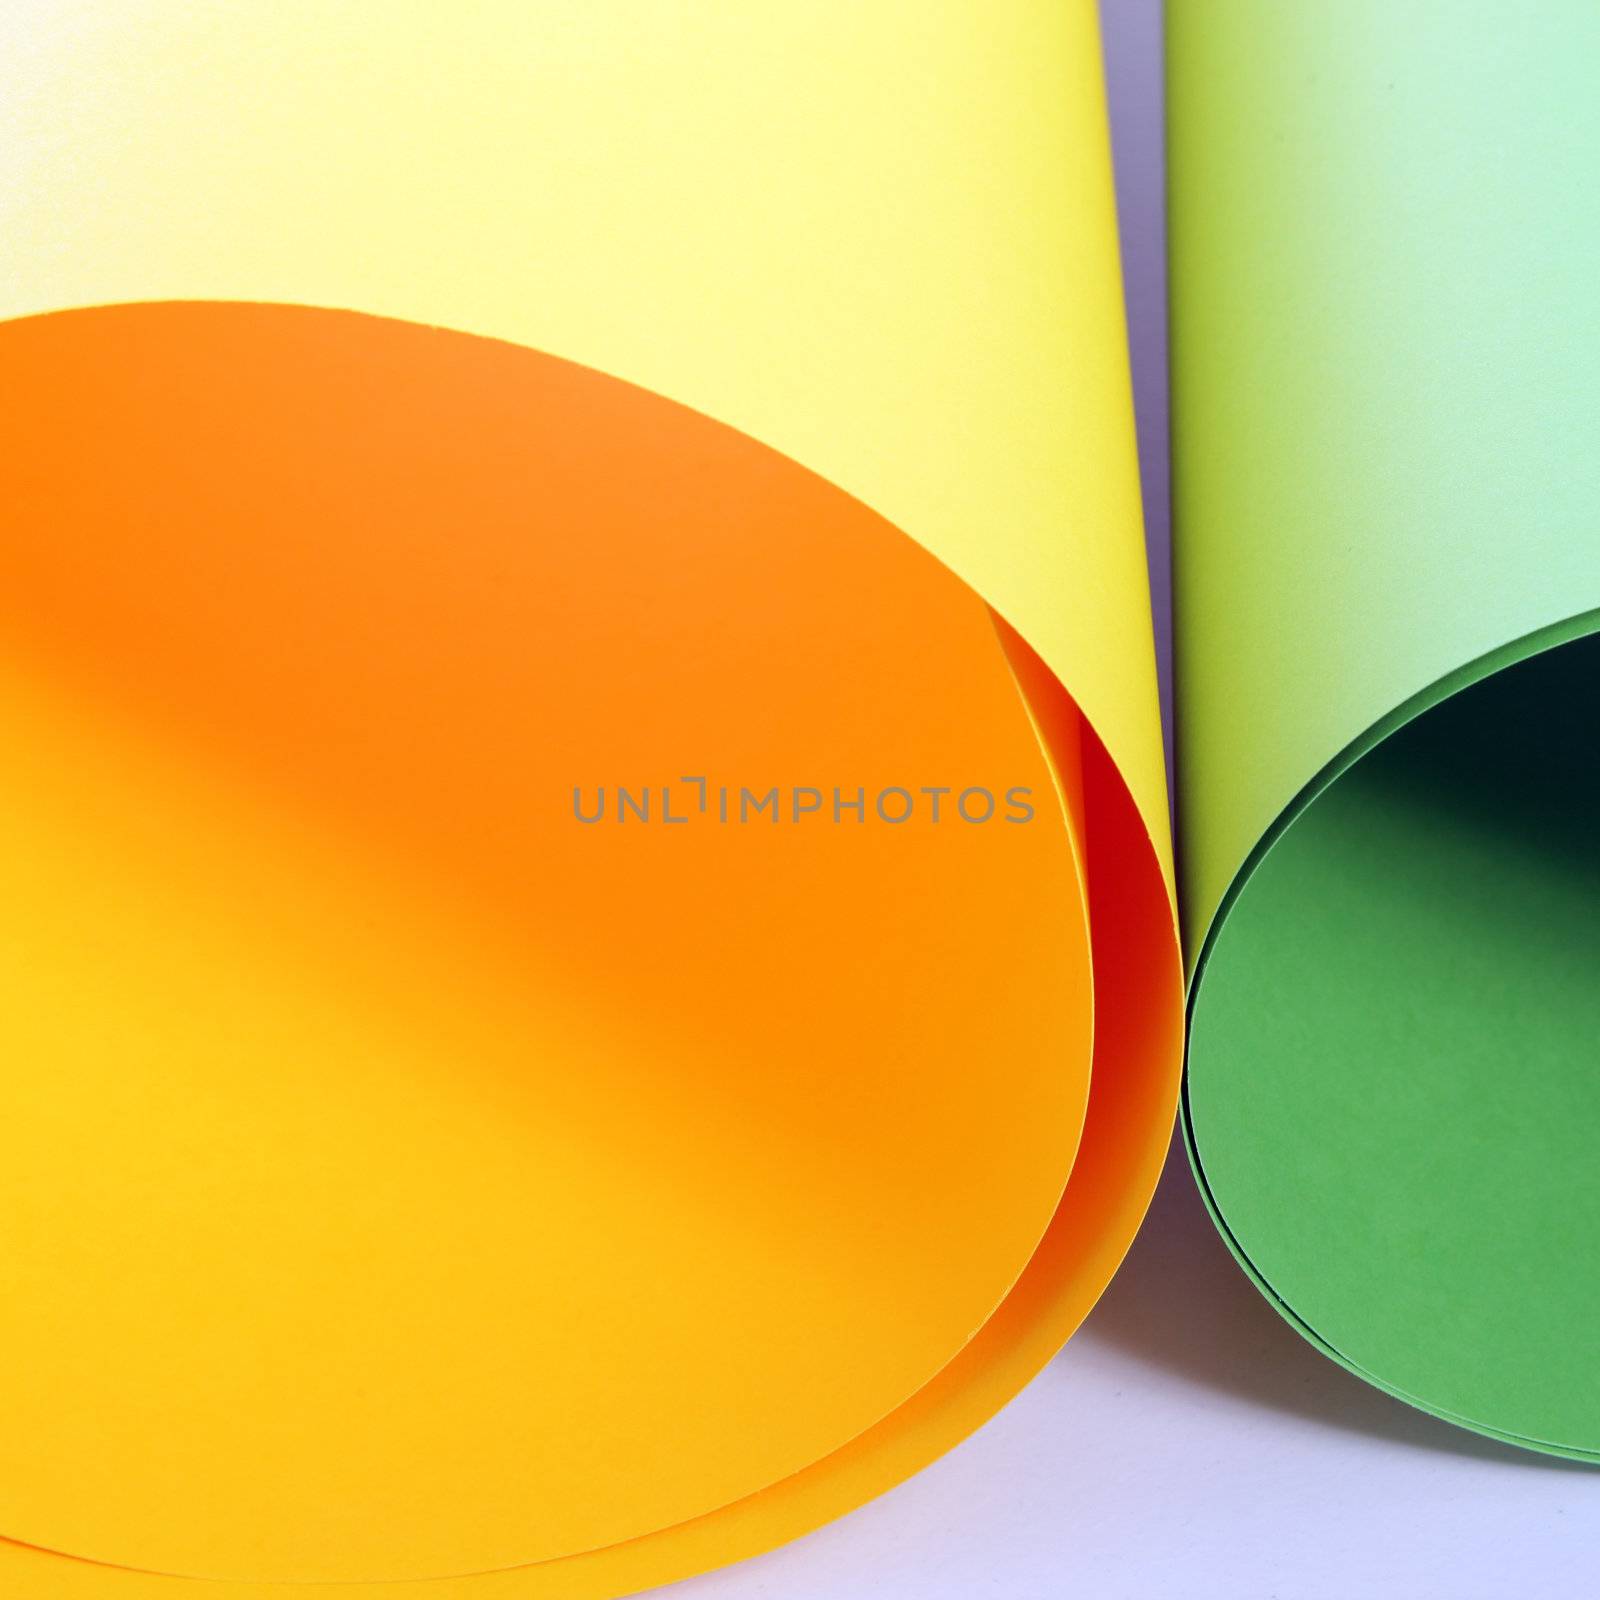 Closeup view of two rolls of colourful cardboard in orange and green for creating posters or artwork lying side by side